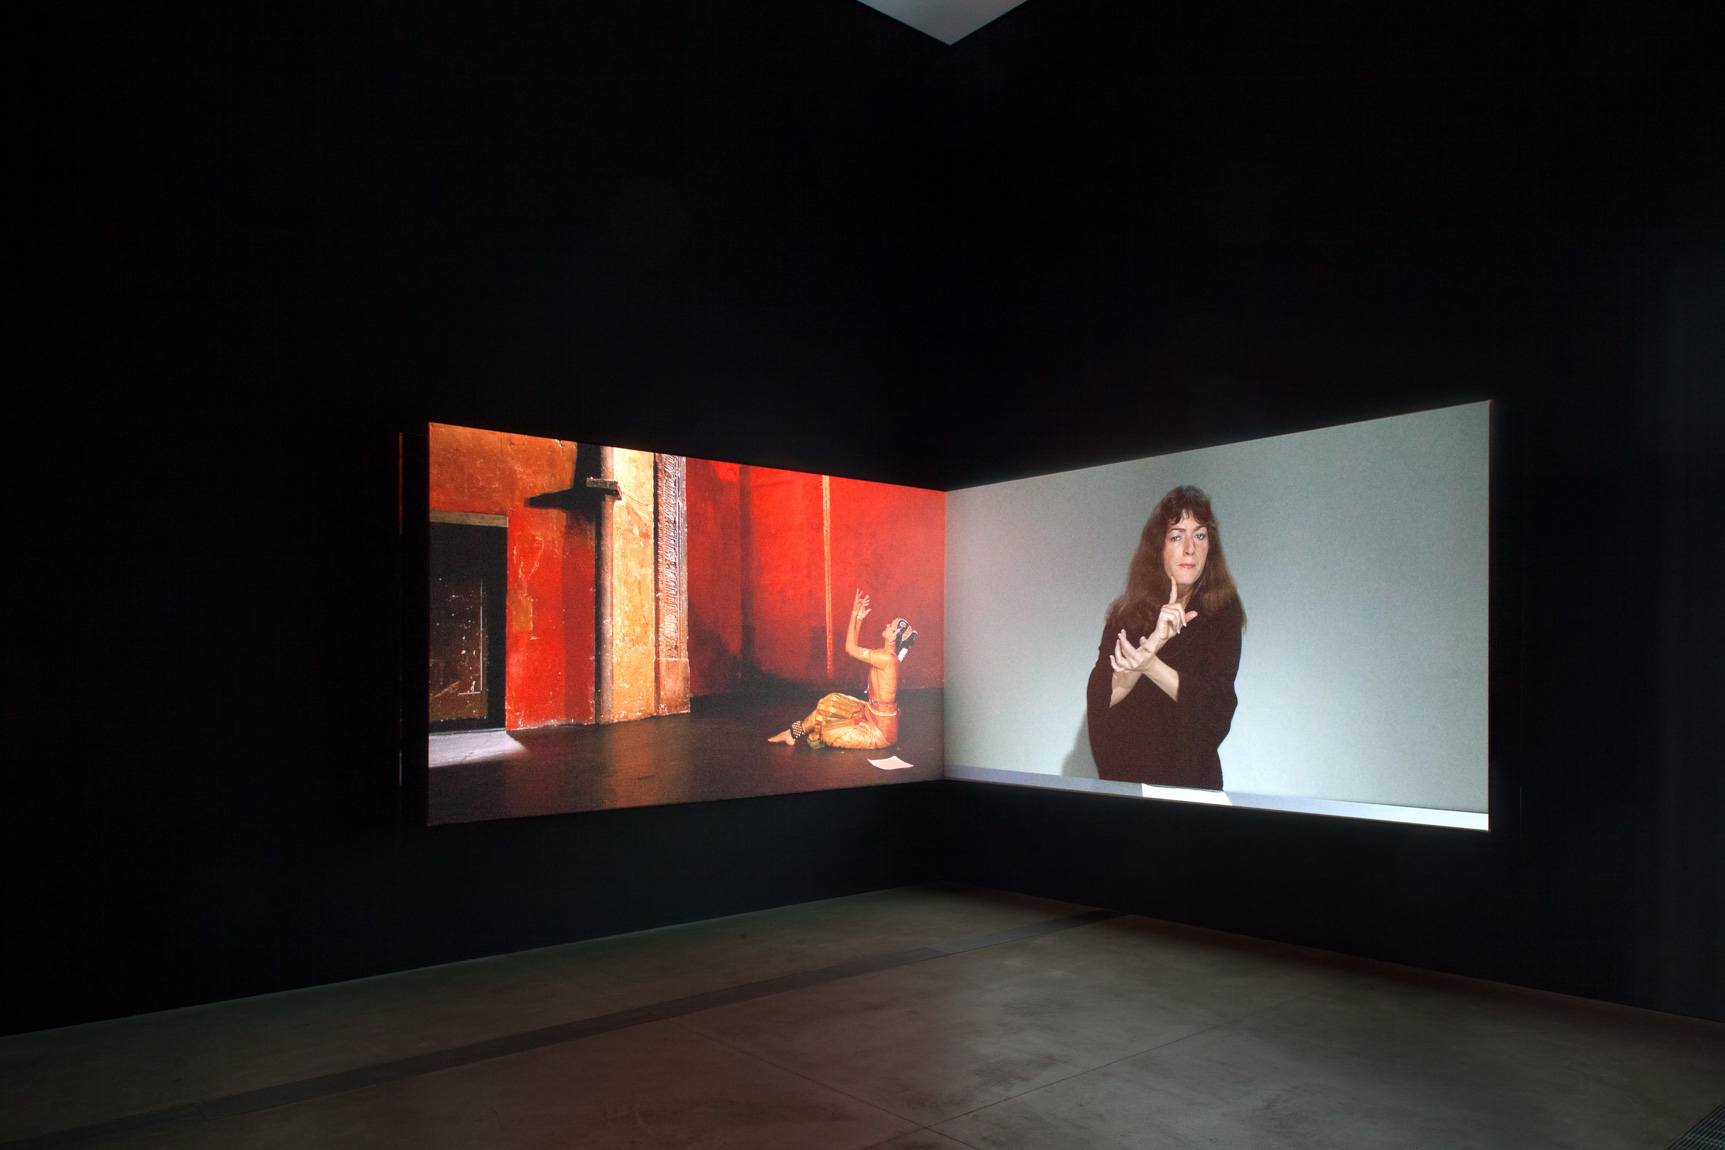 A section of Sophie Calle's "Take Care of Yourself," a film displayed in the Cube Gallery.